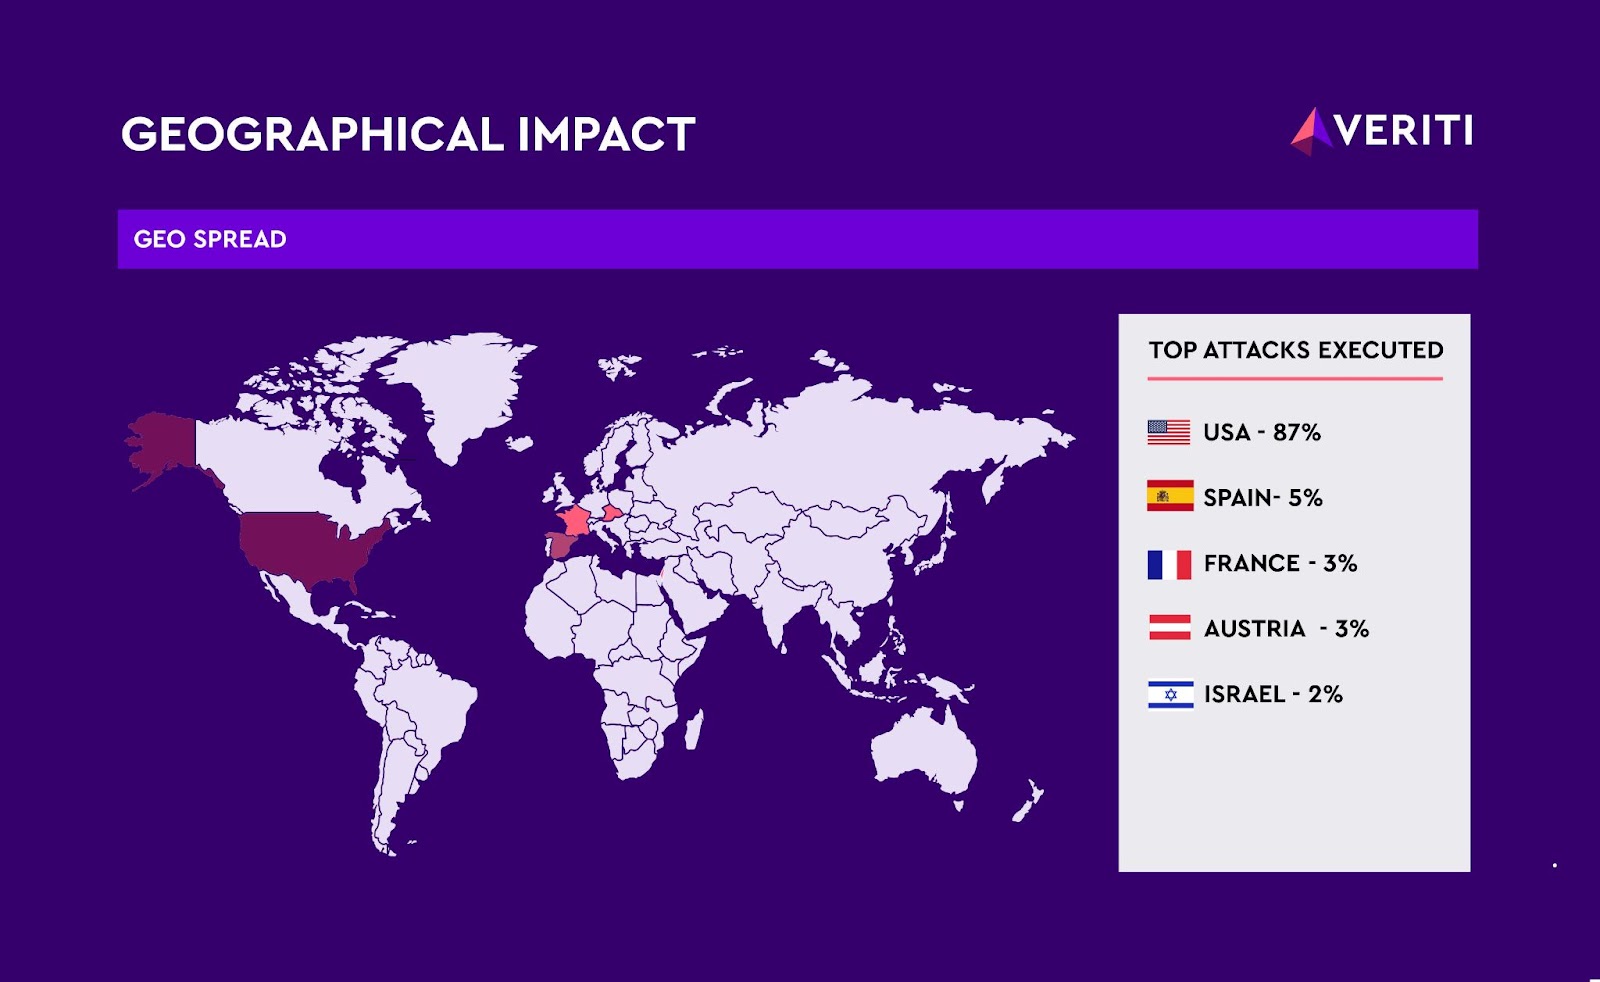 Graphic showing geographic impact of attacks.